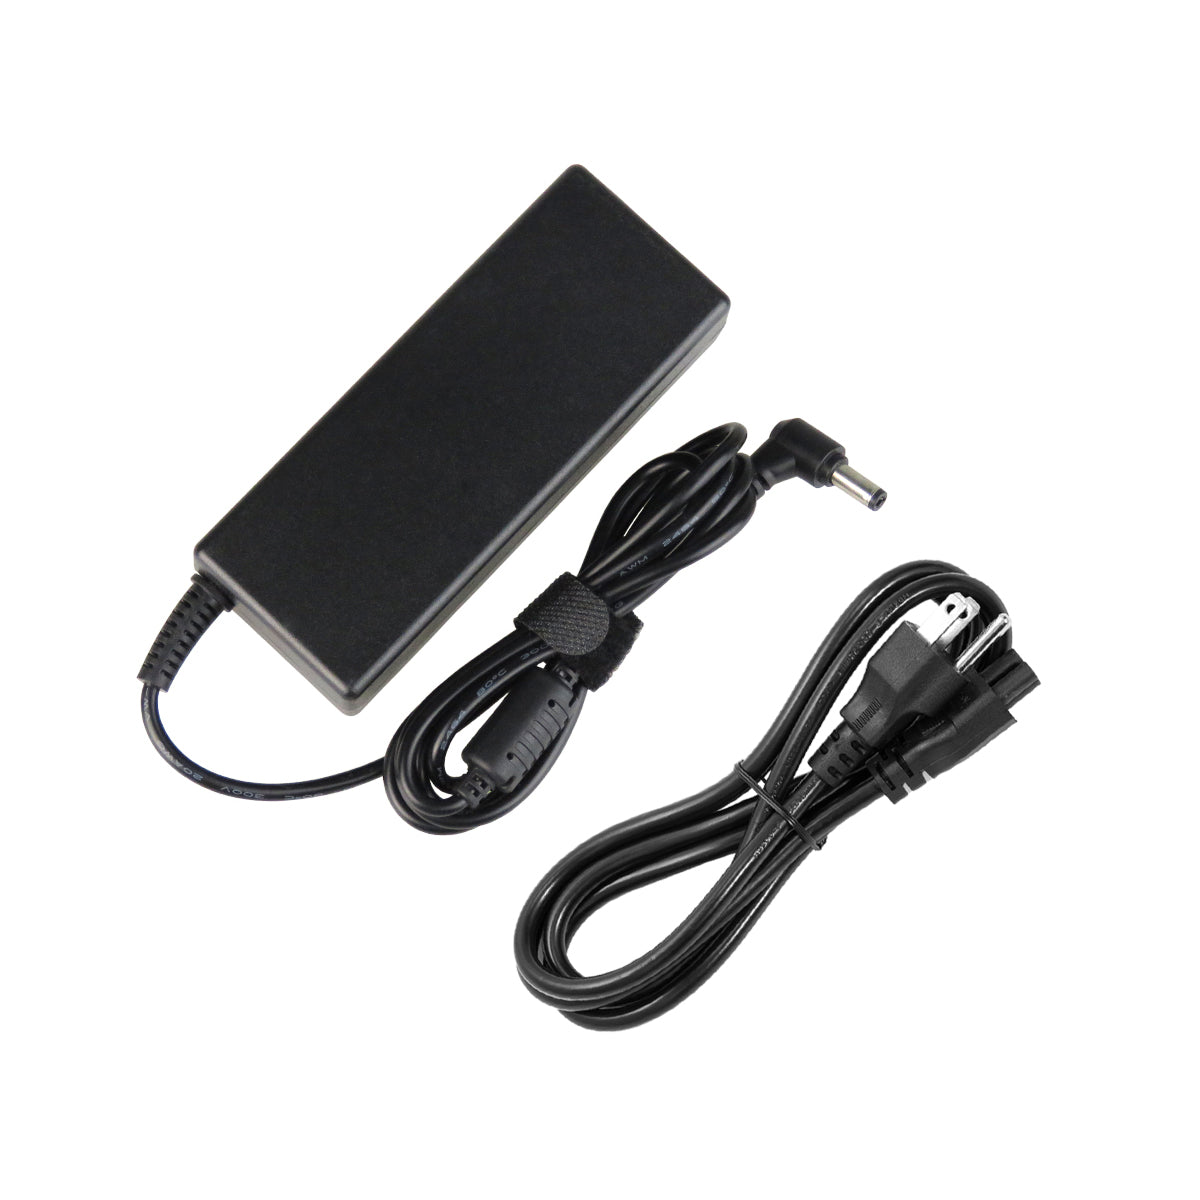 AC Adapter Charger for ASUS N80VR Notebook.